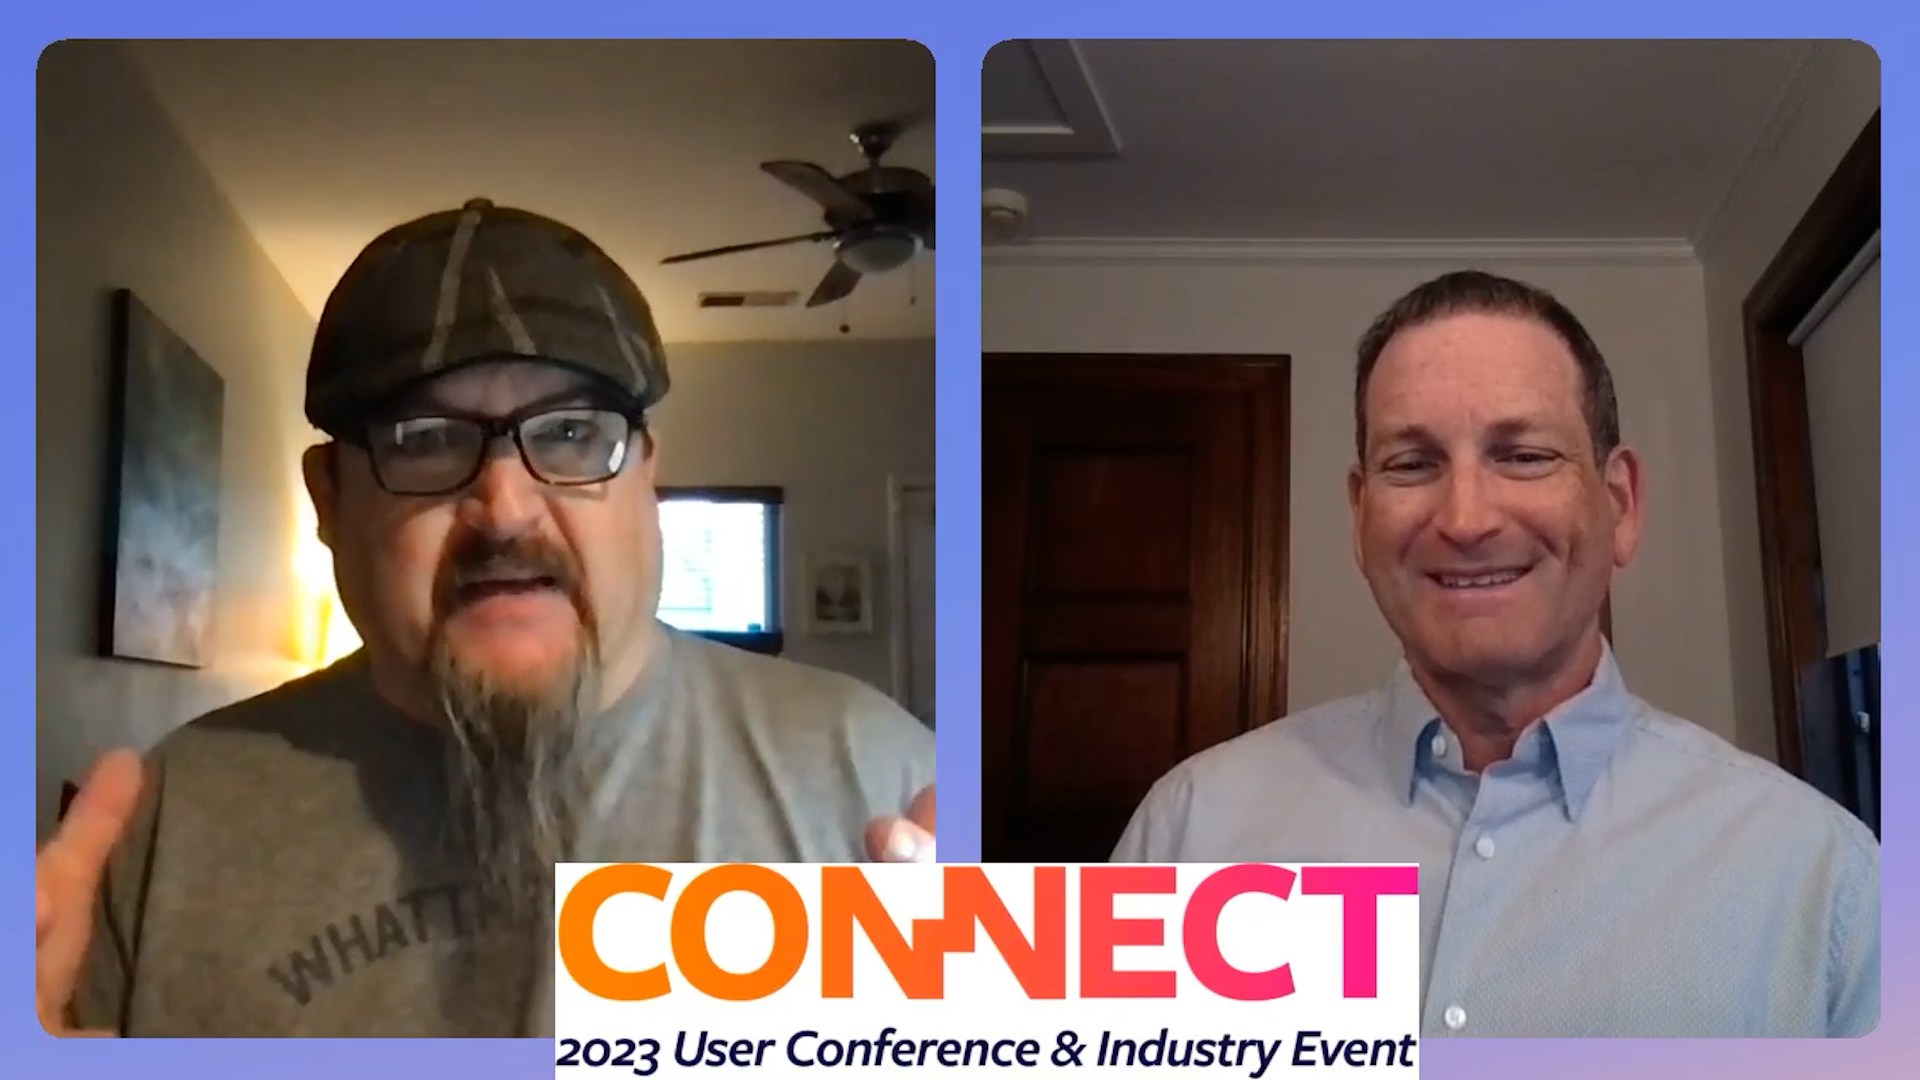 eProductivity Software Executive Chairman Marc Olin Previews the CONNECT Event Coming Up at The Wynn in Las Vegas